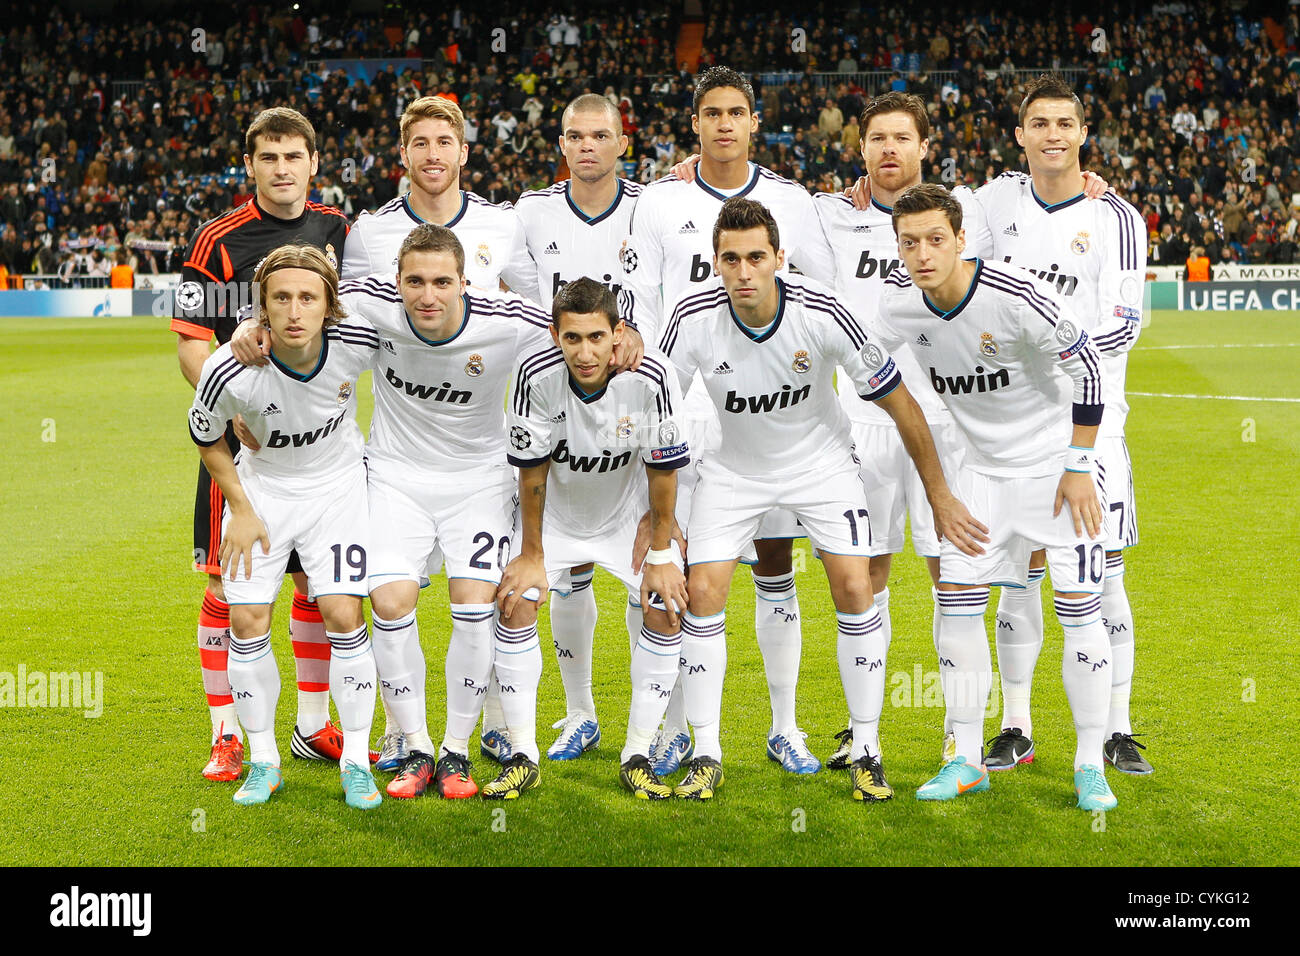 real madrid 2012 champions league